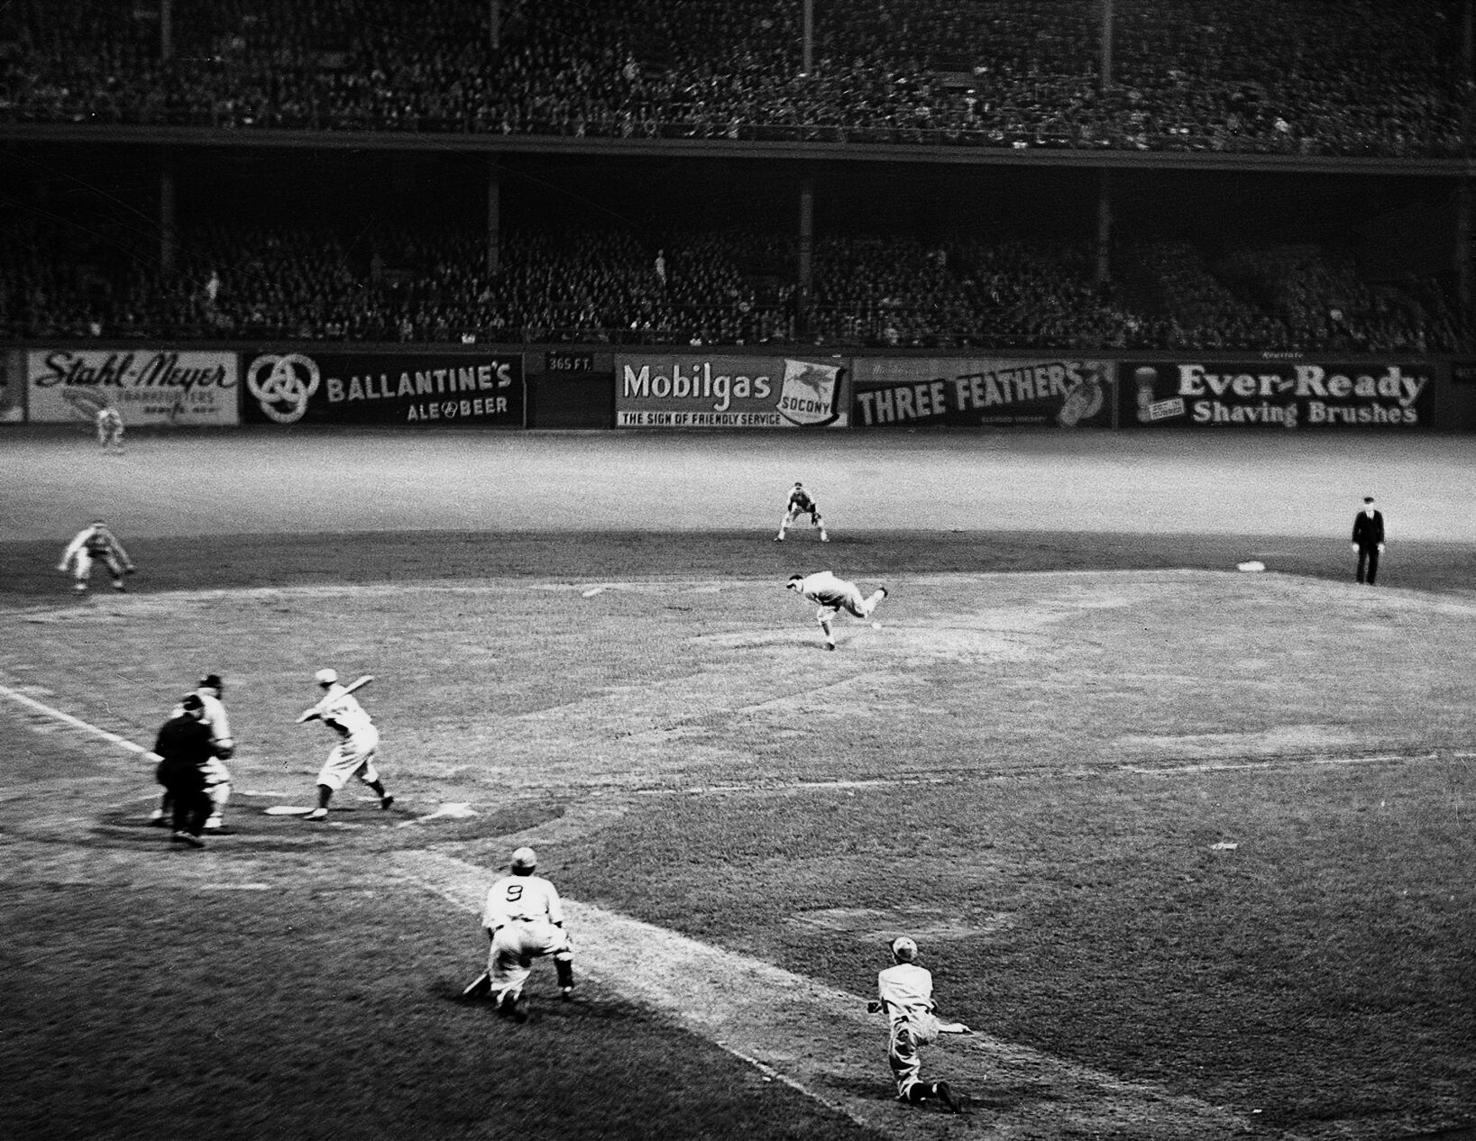 1939 The first major league baseball game is televised